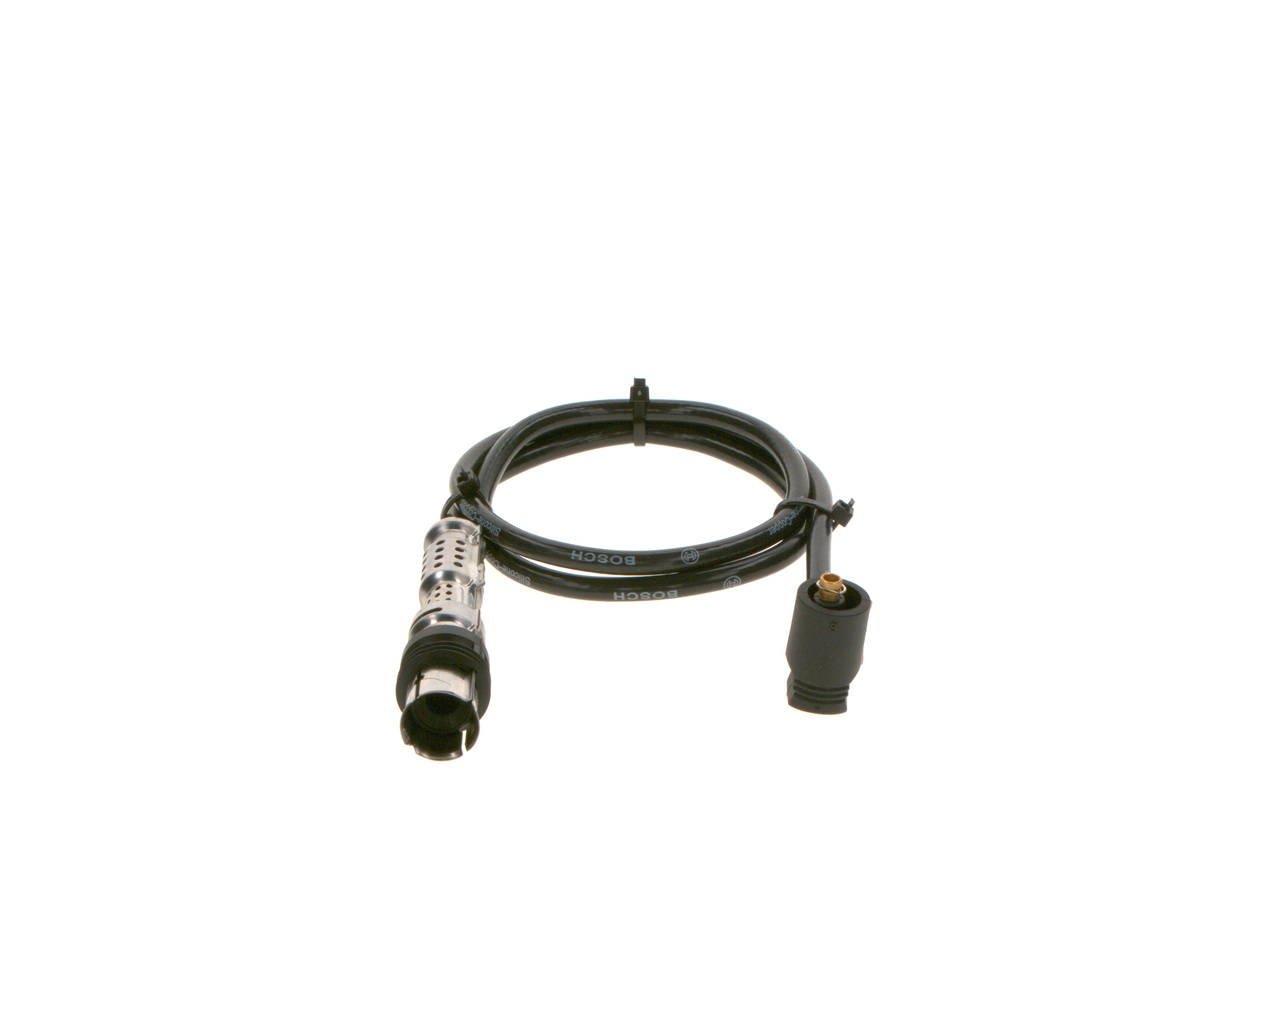 0986356347, Ignition Cable Kit, BOSCH, 021905409AA, 229AA200, B347, RC-VW255